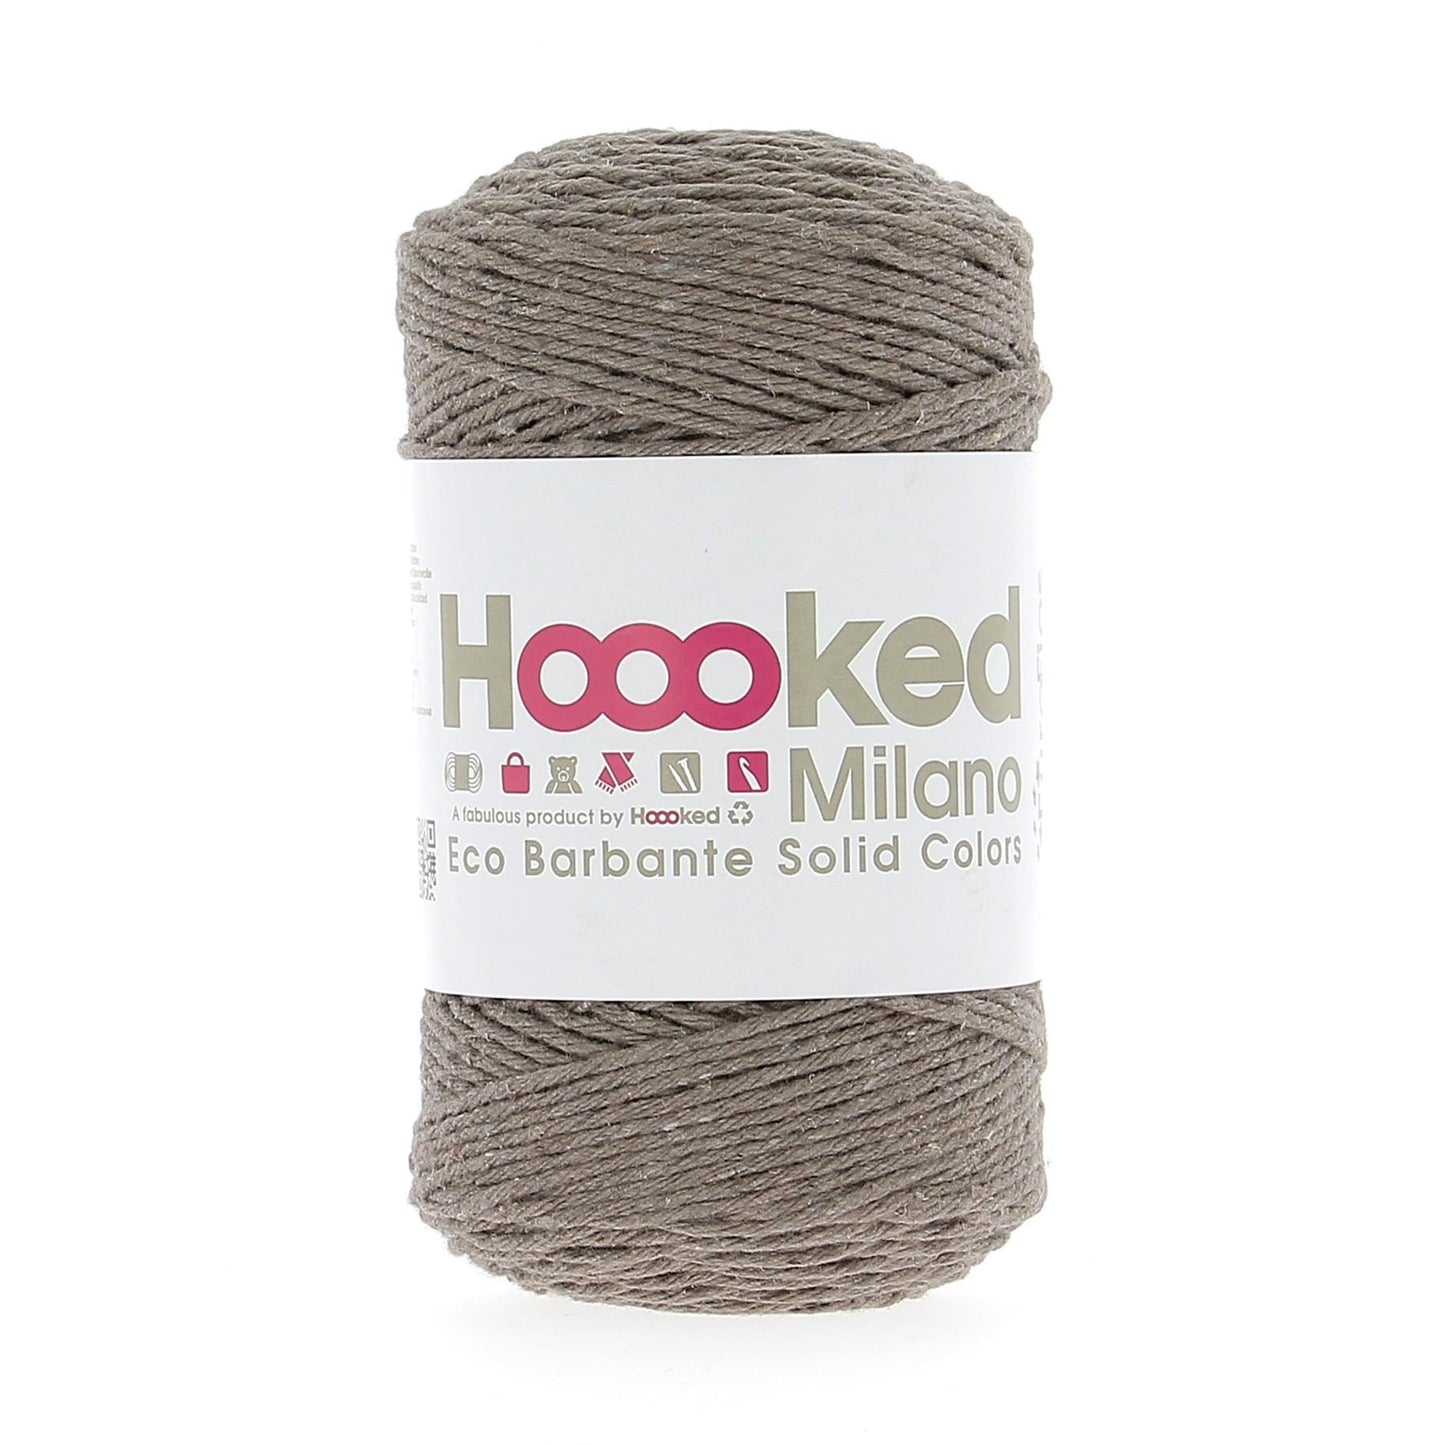 [Hoooked] R310 Eco Barbante Milano Taupe Cotton Yarn - 204M, 200g